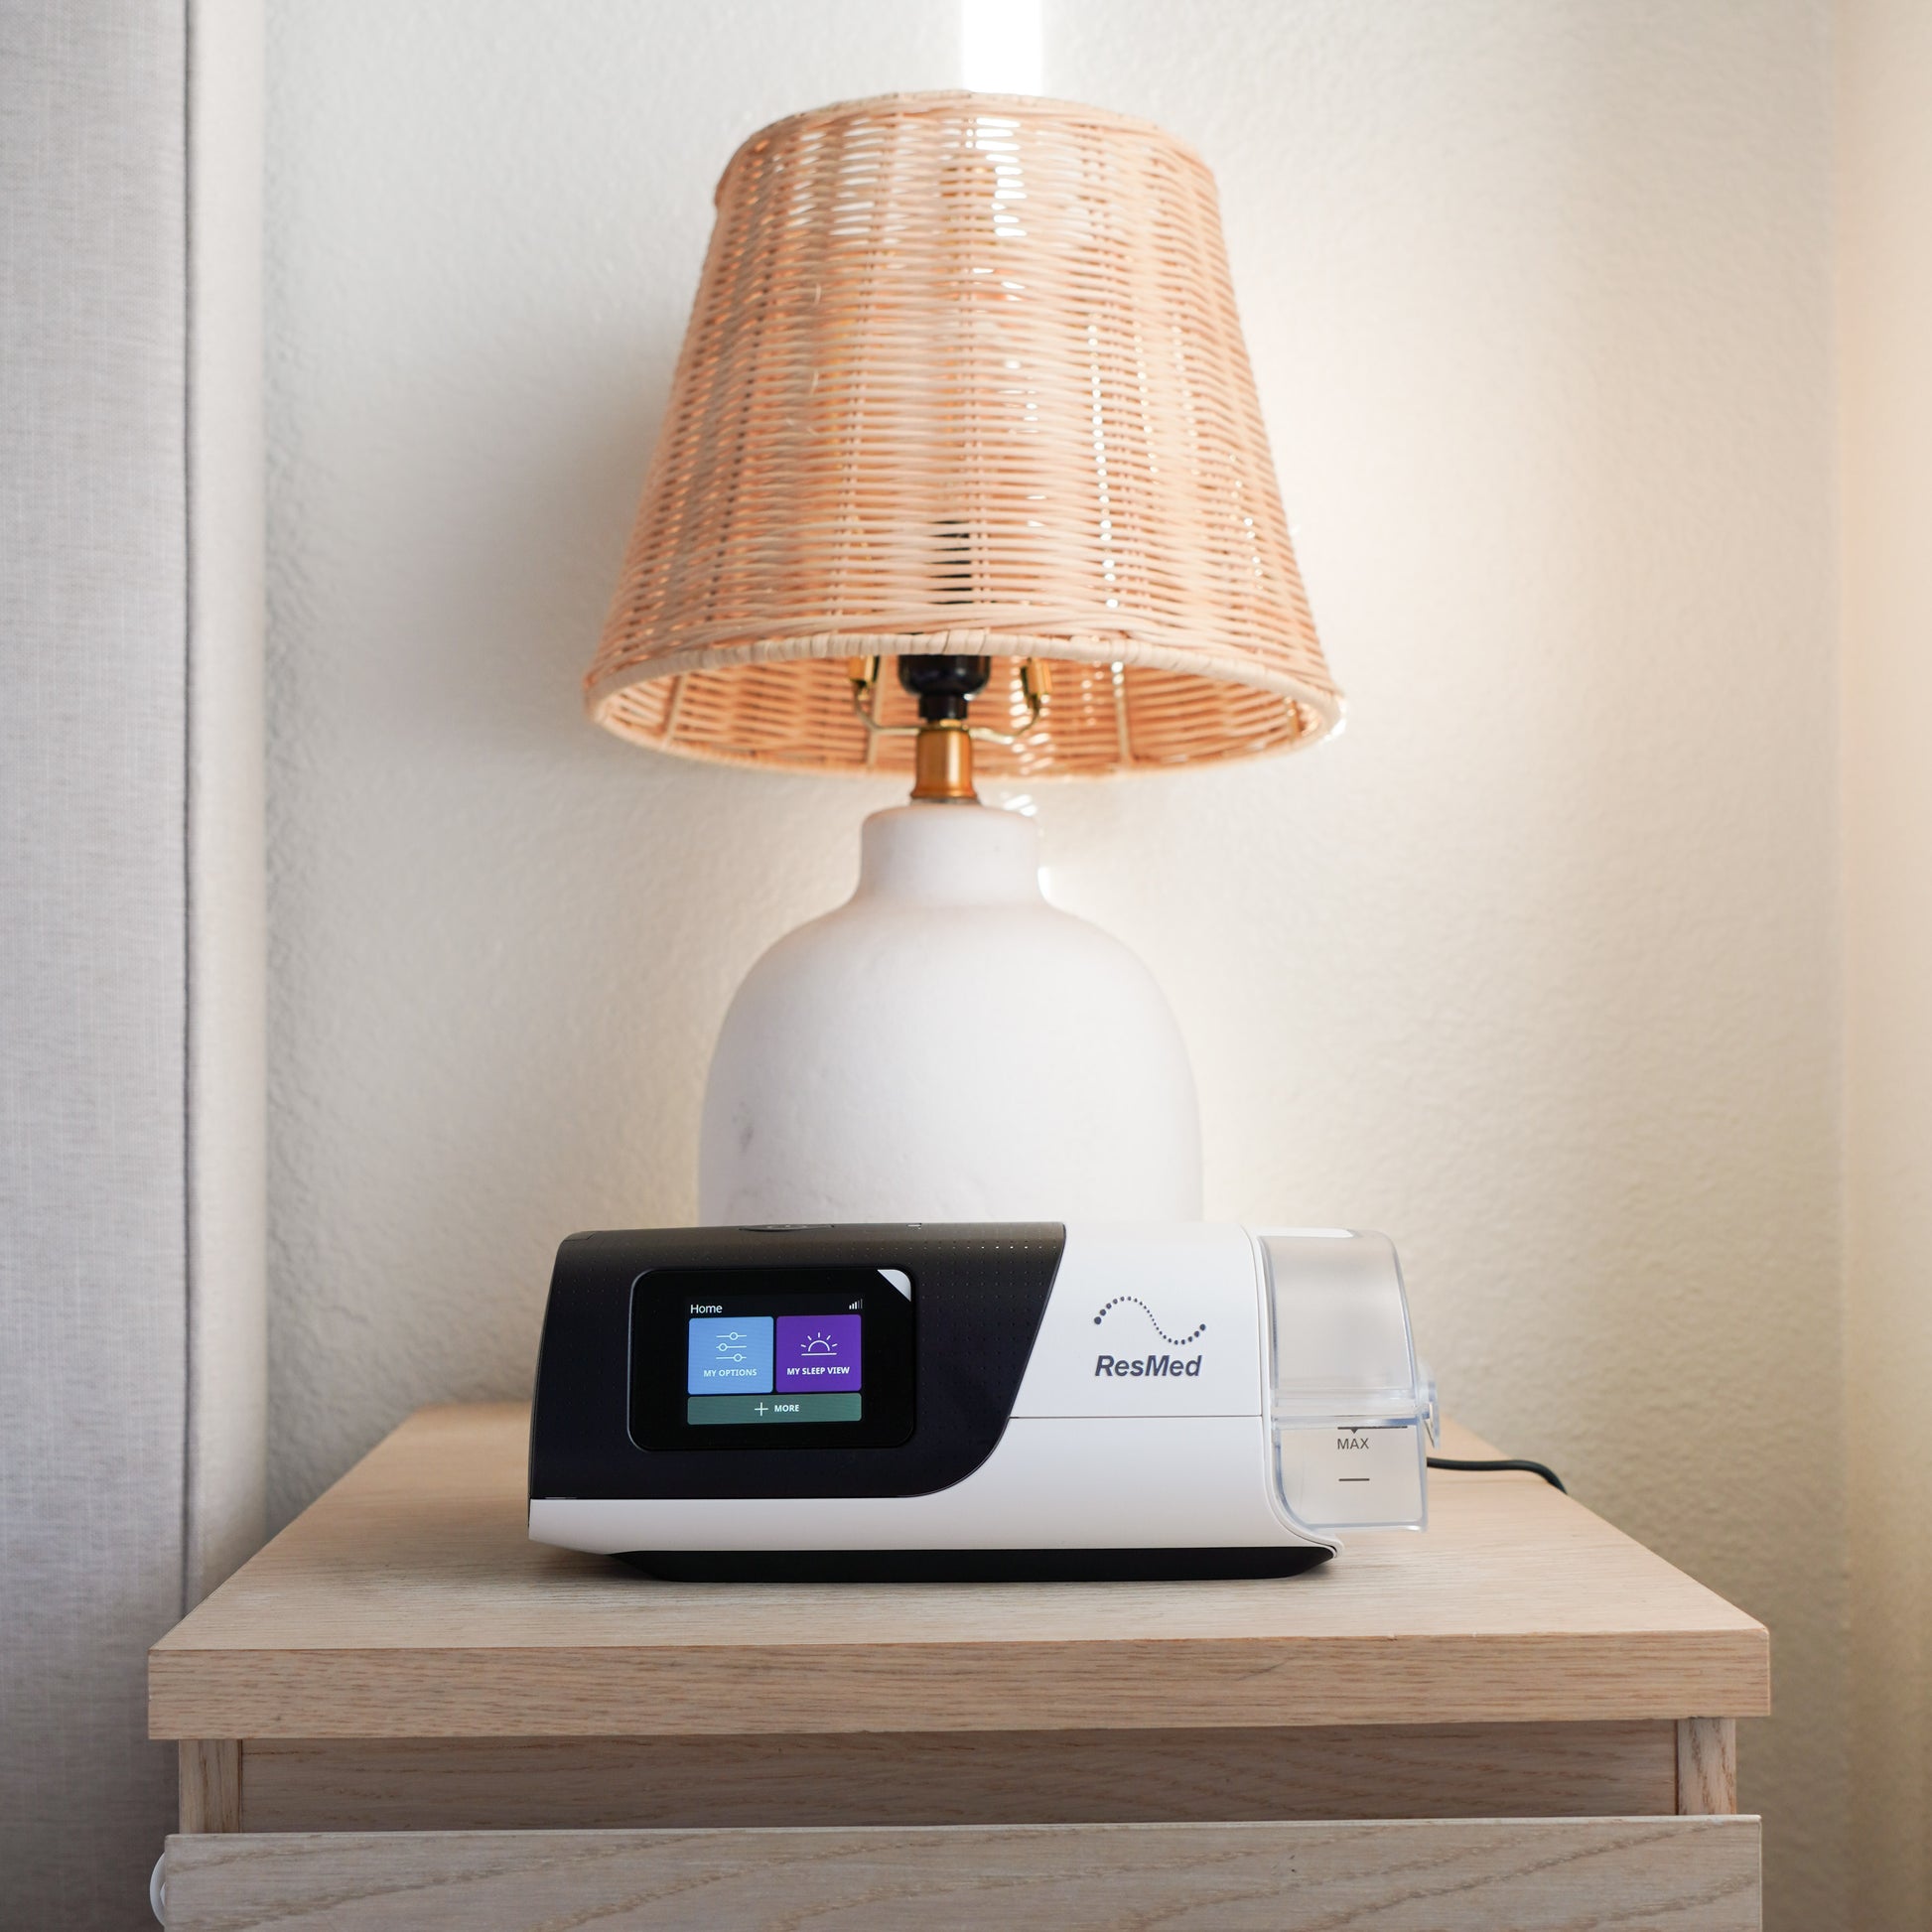 The portable AirSense 11 placed on on bedside table